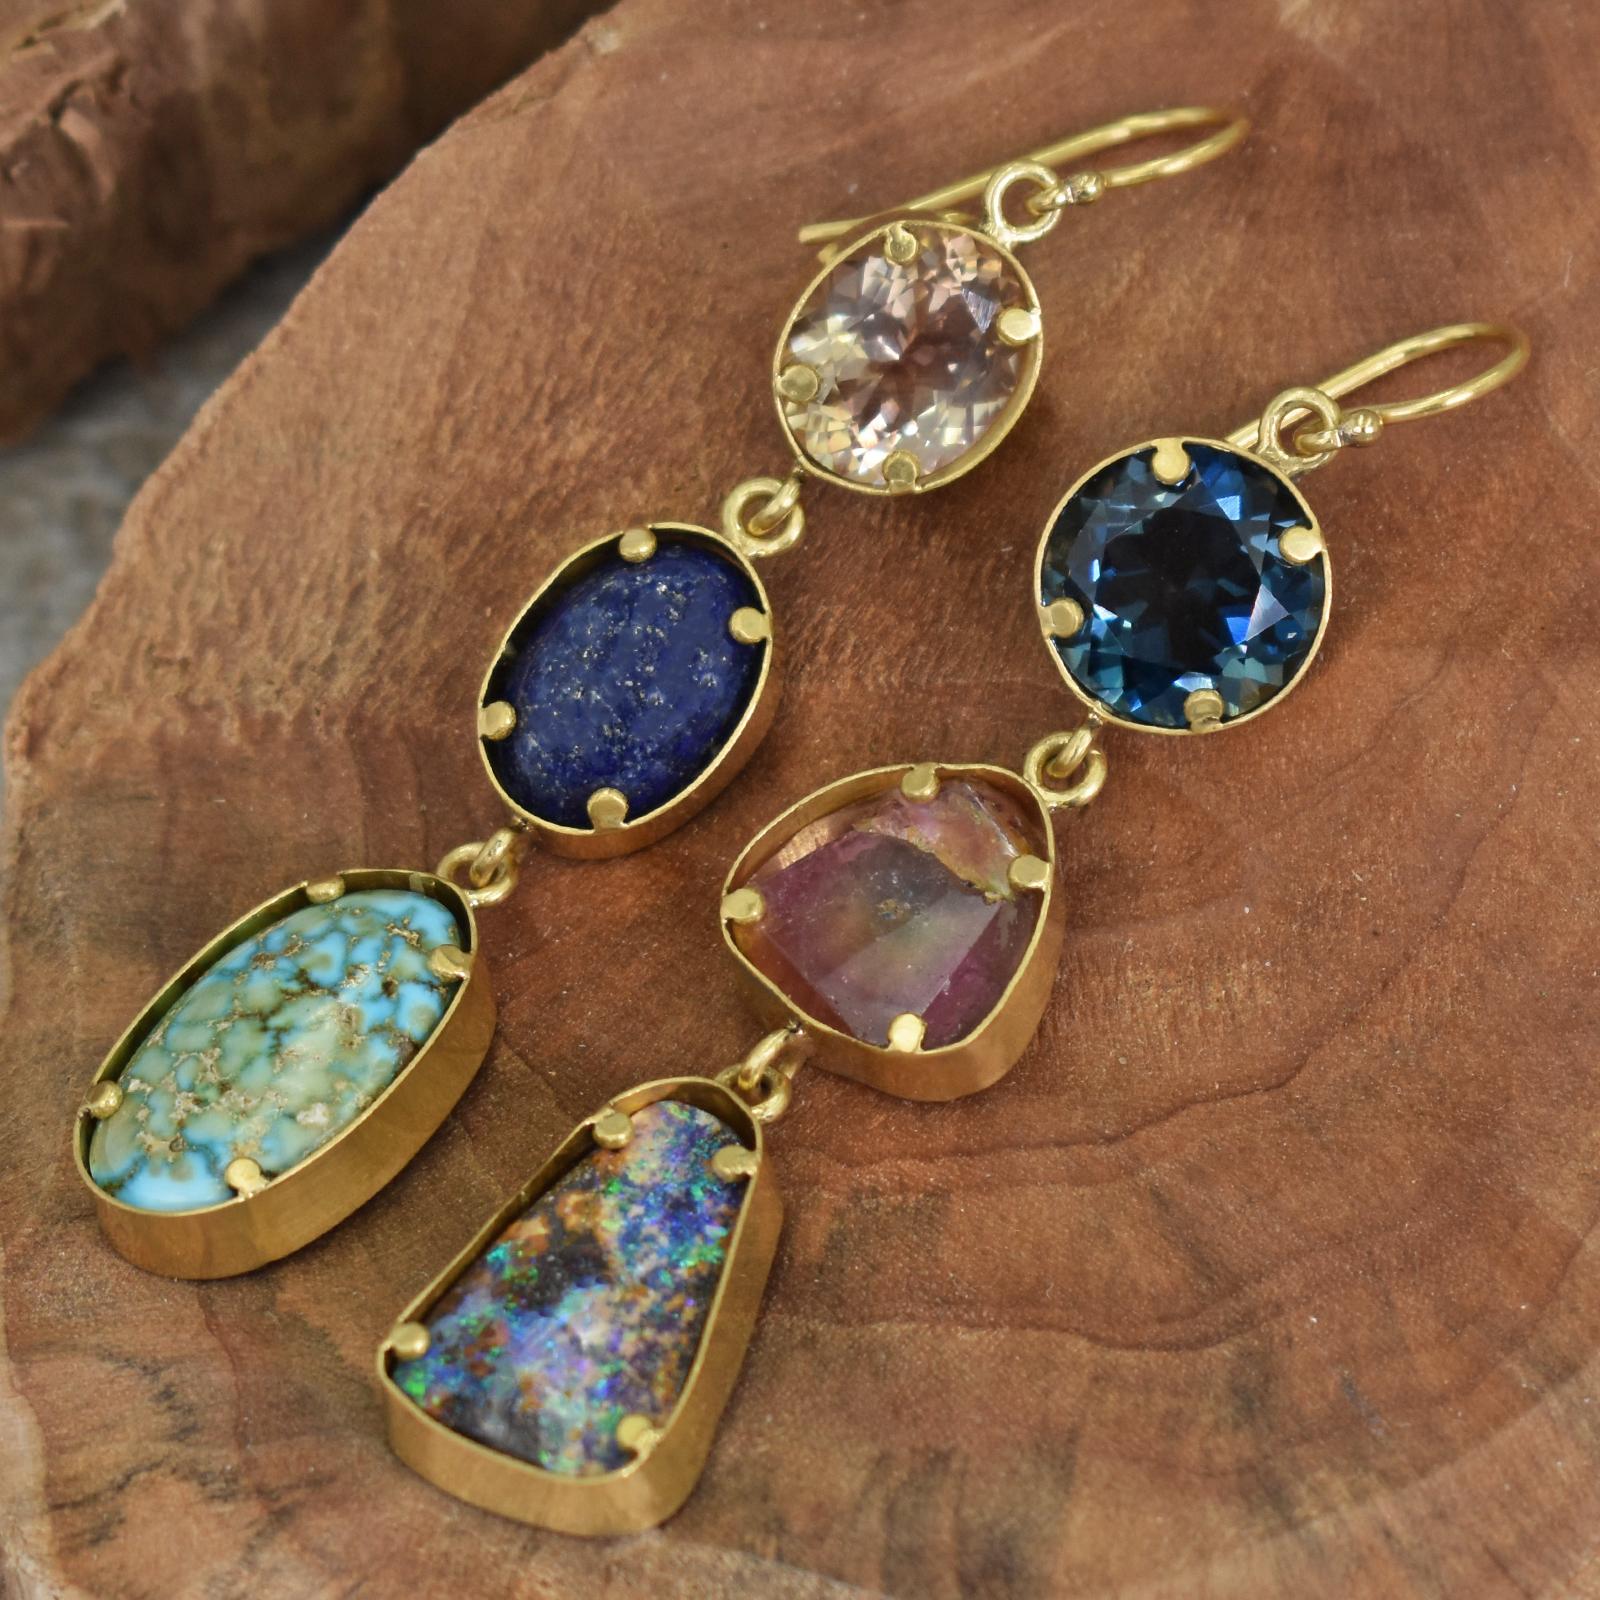 Three tier, hand forged 22k yellow gold dangle earrings featuring Sunstone (4.3 ct), Lapis Lazuli (7.9 ct), Turquoise Mountain Turquoise (9.6 ct), London Blue Topaz (7.7 ct), Watermelon Tourmaline (8.1 ct) and Australian Boulder Opal (7.7 ct)